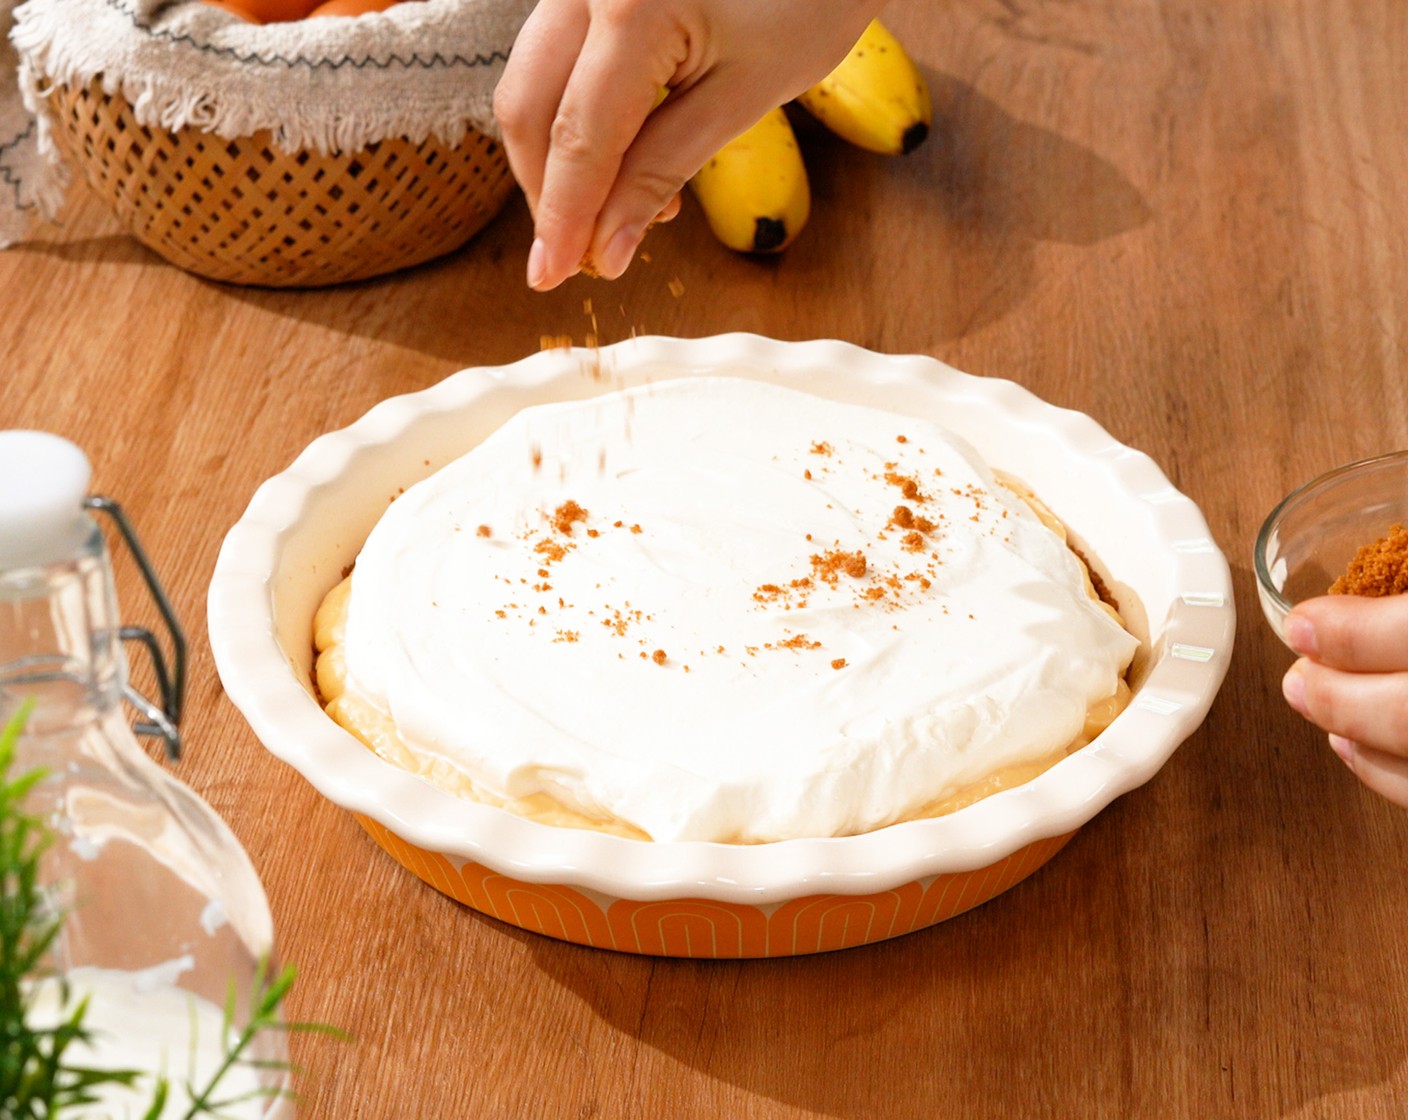 step 12 Sprinkle the banana cream pie with the remaining biscuit crumbs and serve.